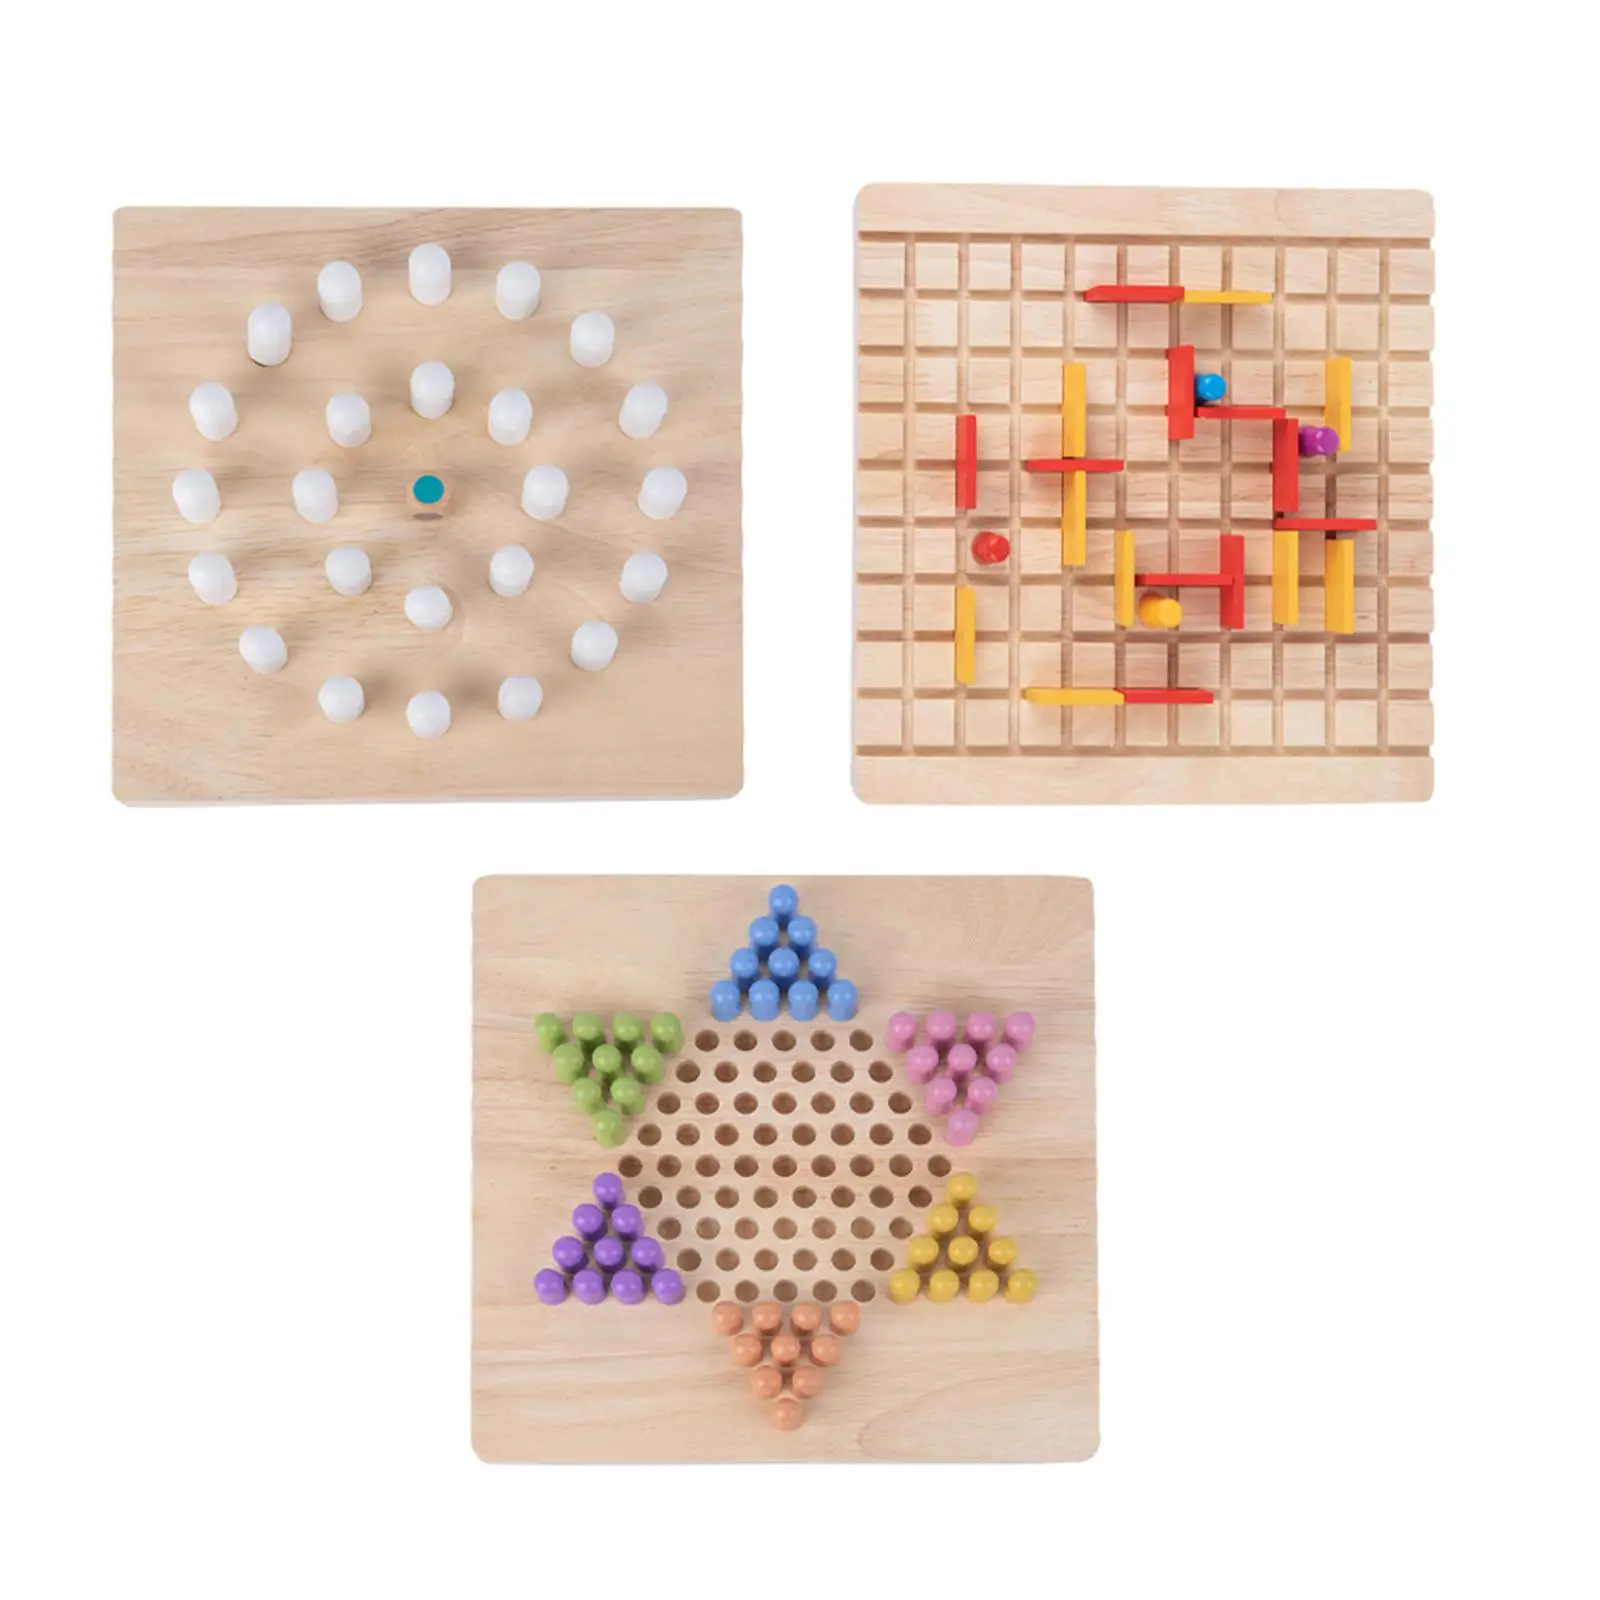 Wooden Board Game Pegs Set Portable Educational Brain Teaser Toys for Interaction Gathering Activity Social Skills Preschool